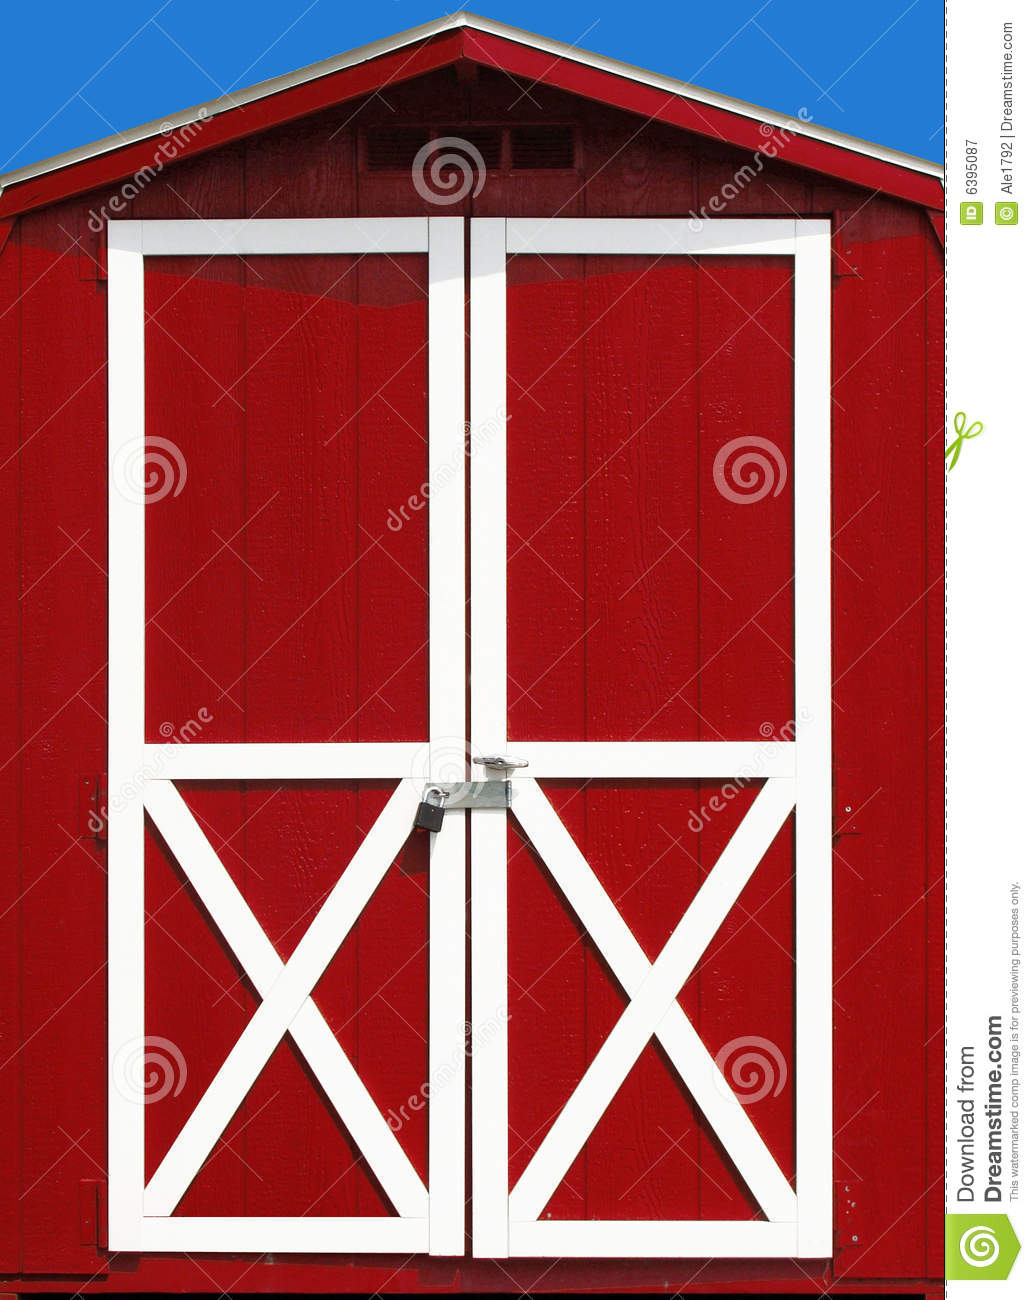 Red Barn Door Royalty Free Stock Photography   Image  6395087